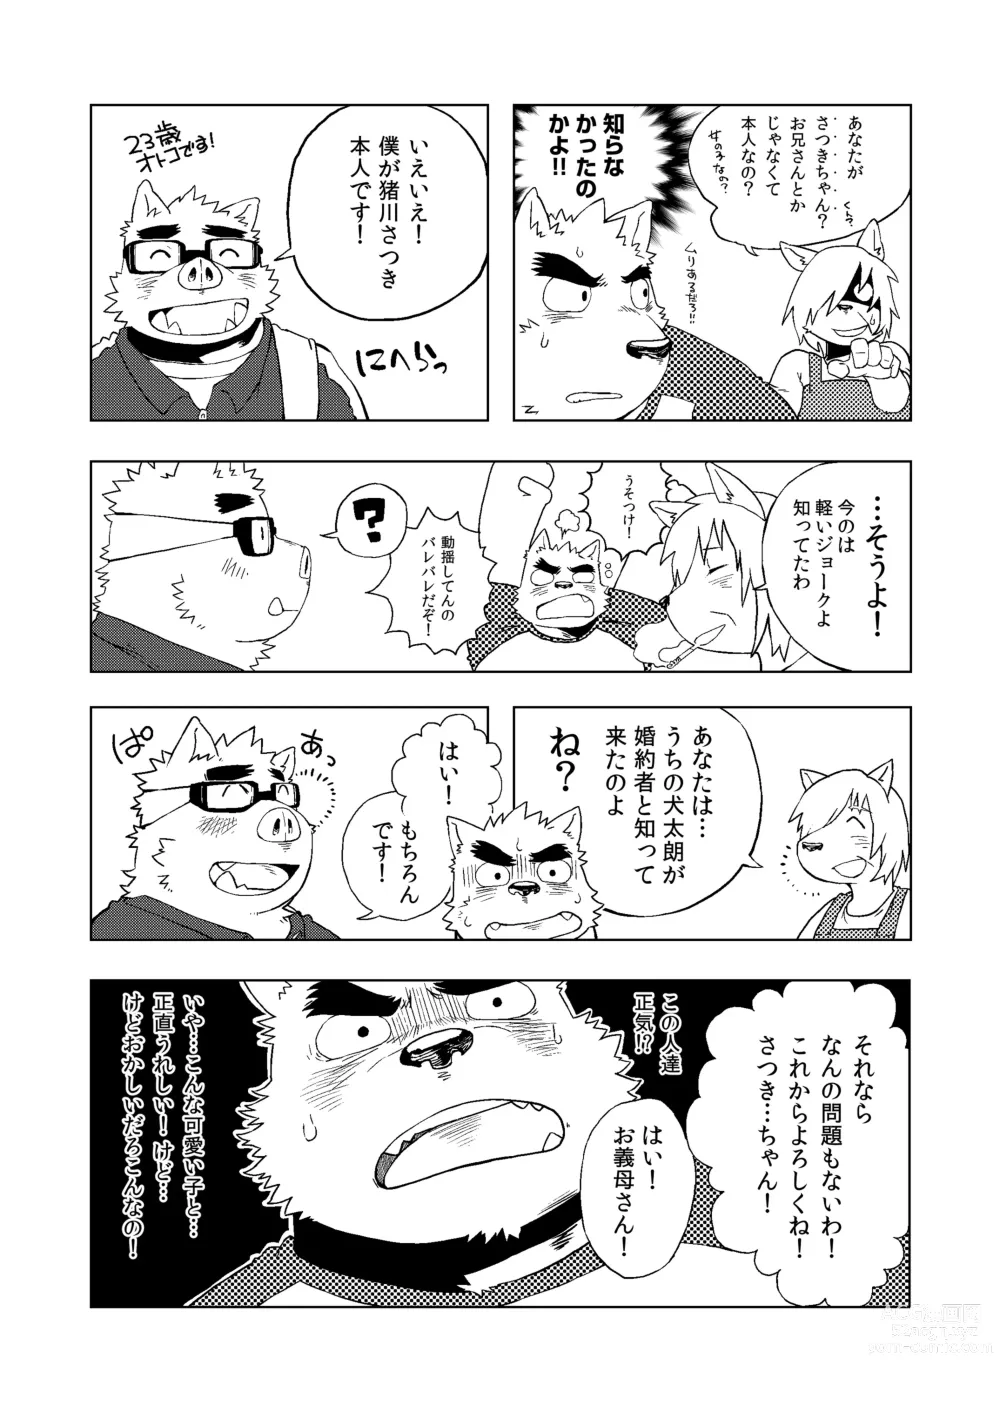 Page 5 of doujinshi Is it true that you are getting married!?